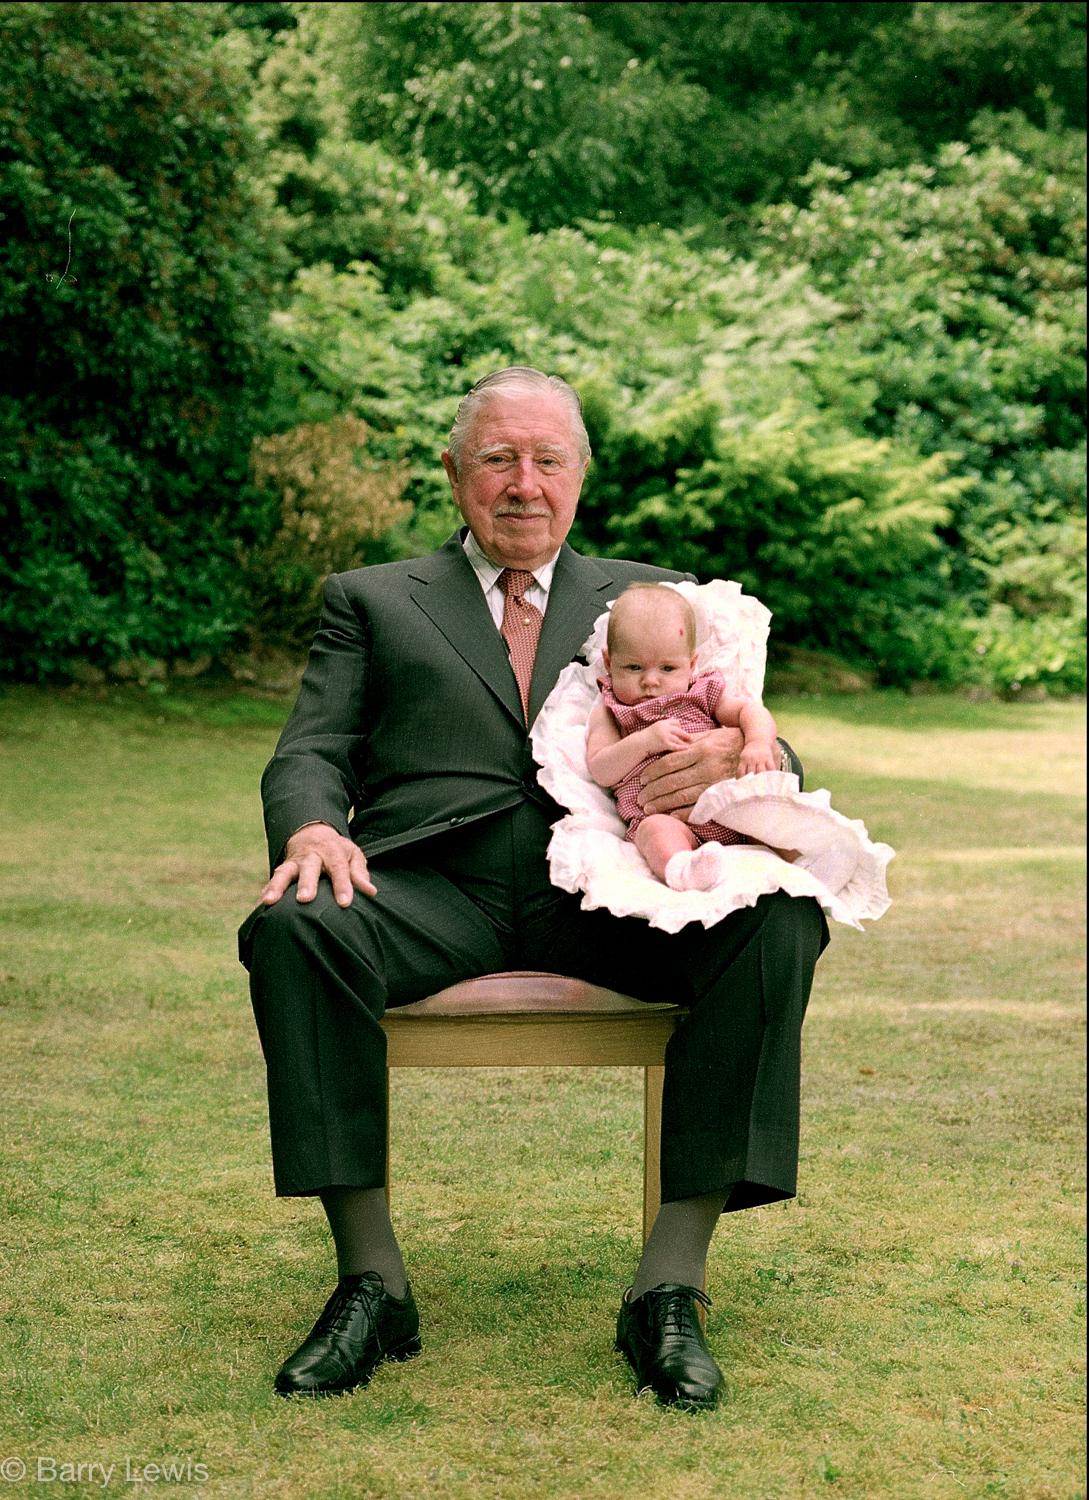  General Augusto Pinochet Ugarte, dictator of Chile, under house arrest in England 2000 with his granddaughter.
The charges against him included 94 counts of torture and crimes against humanity. 